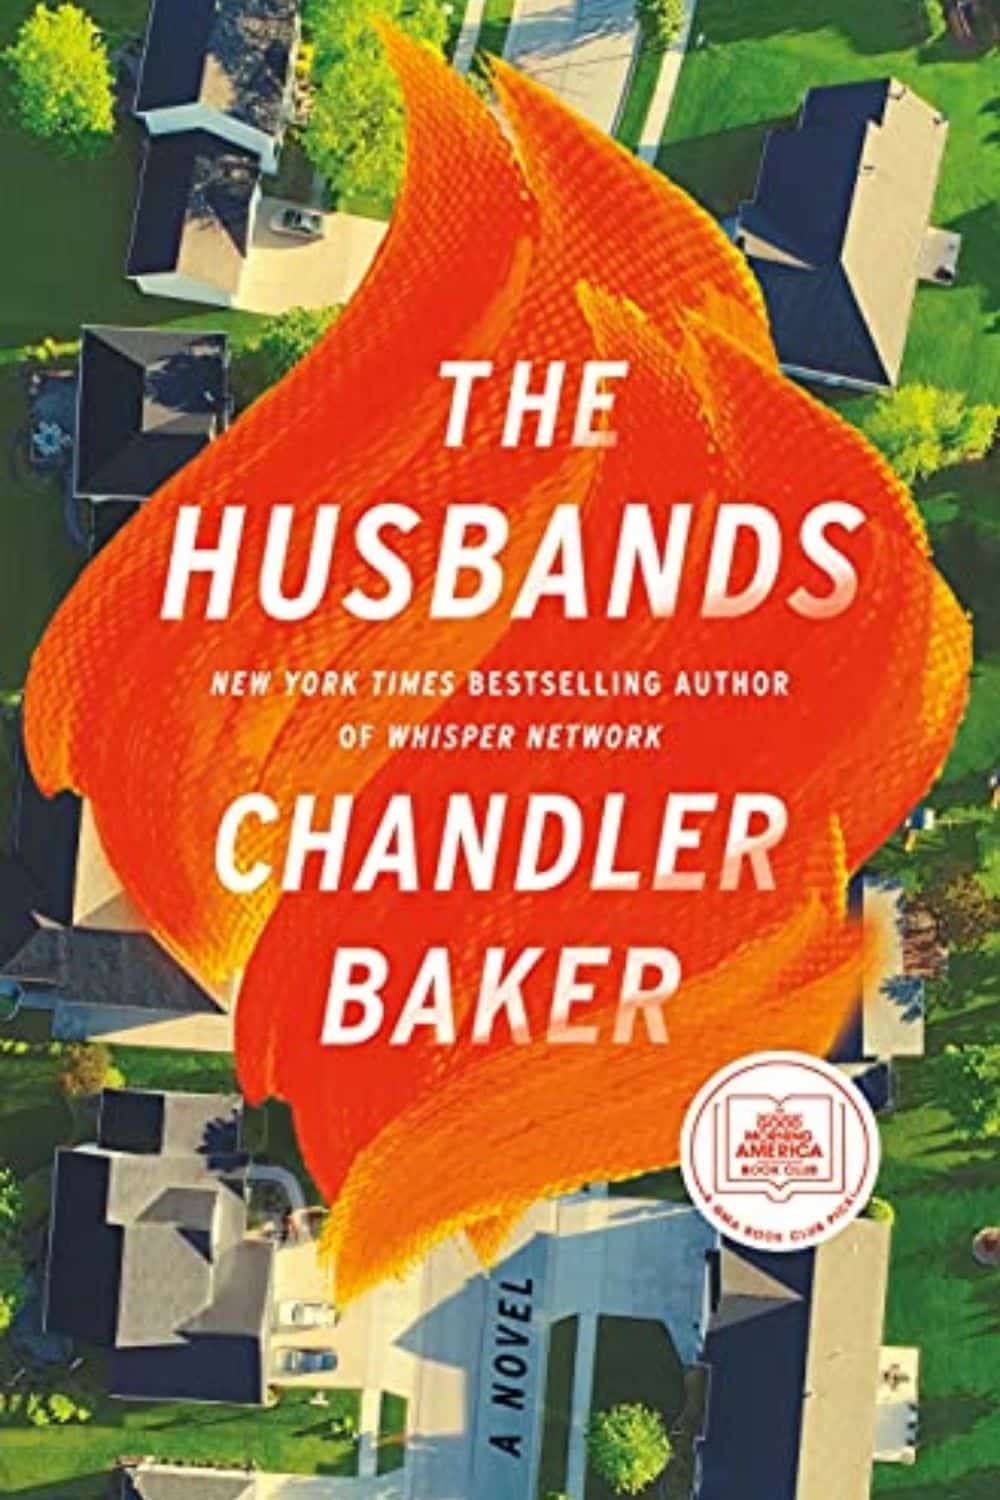 The Husbands By Chandler Baker Is Fun, Clever And Witty